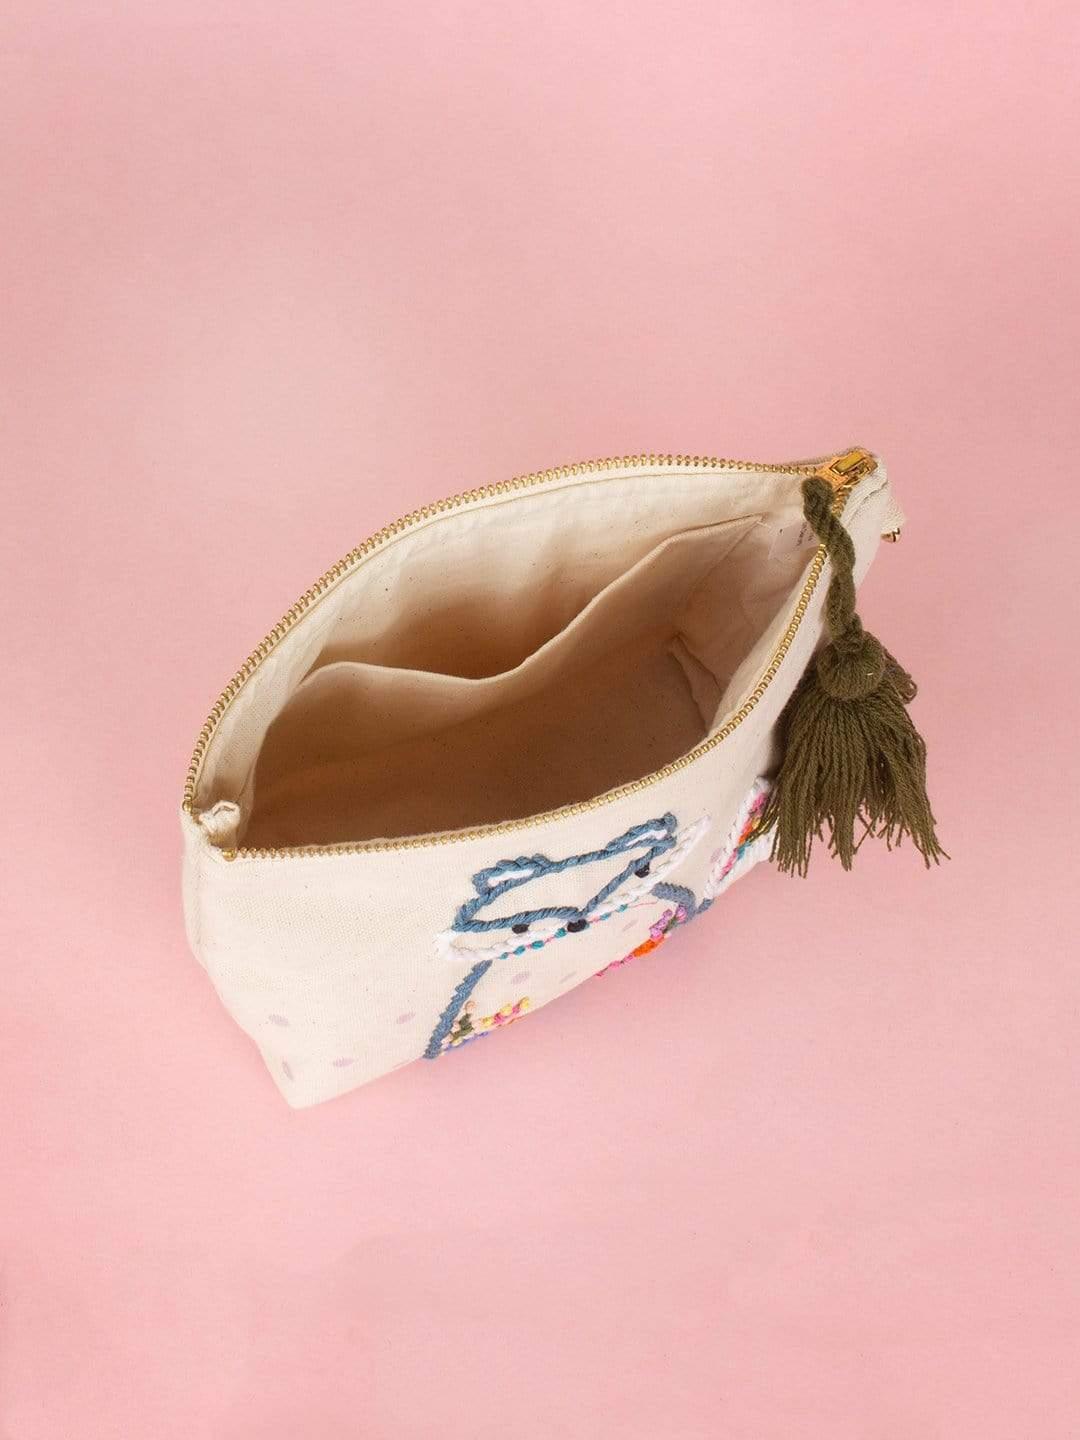 Clever Fox Pouch - The Wishing Chair